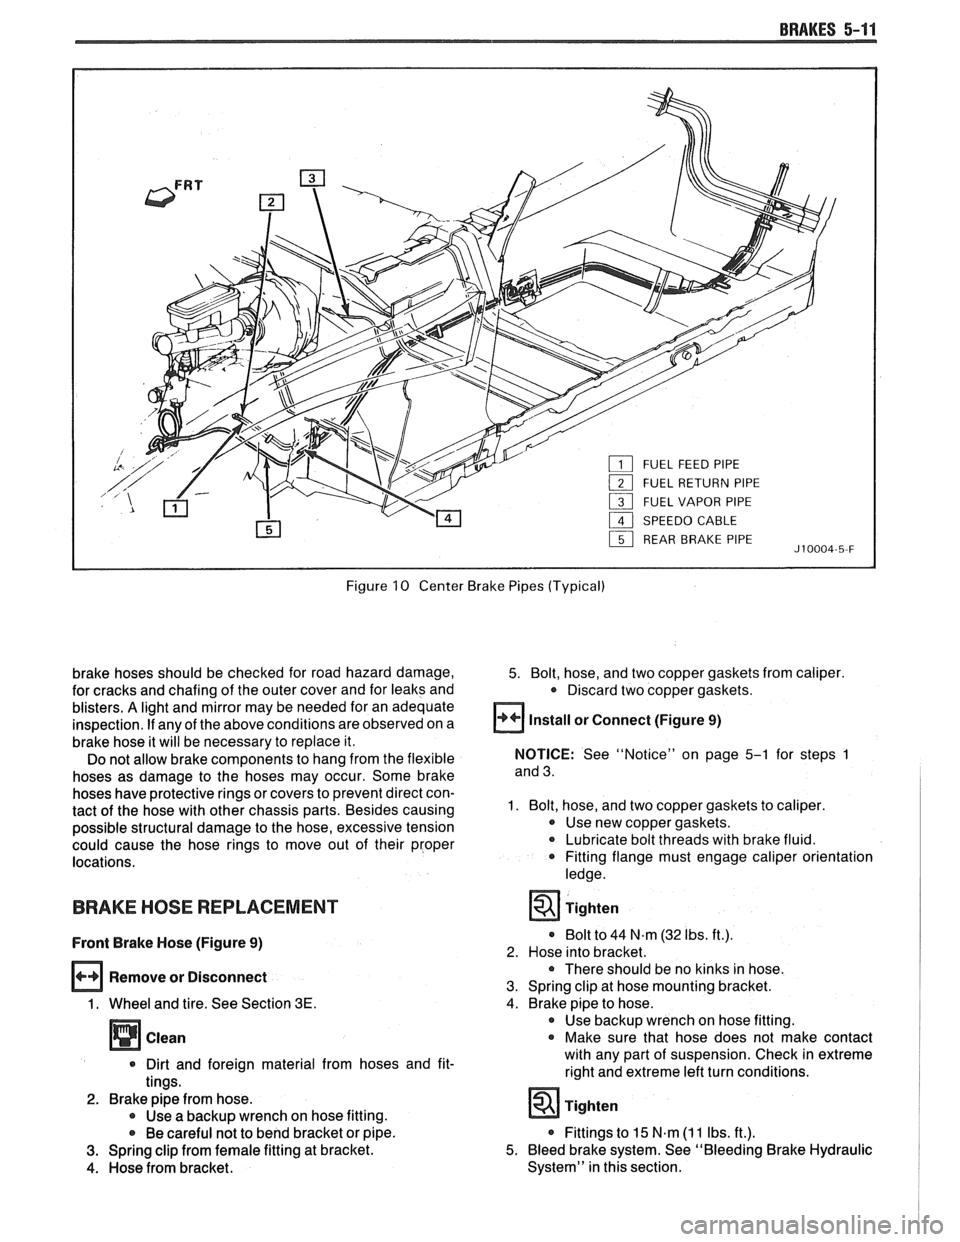 PONTIAC FIERO 1988  Service Repair Manual 
BRAKES 5-11 
Figure 10 Center Brake Pipes (Typical) 
brake  hoses  should be checked  for road hazard damage, 
for  cracks and chafing of the outer cover and  for leaks and 
blisters. 
A light and mi